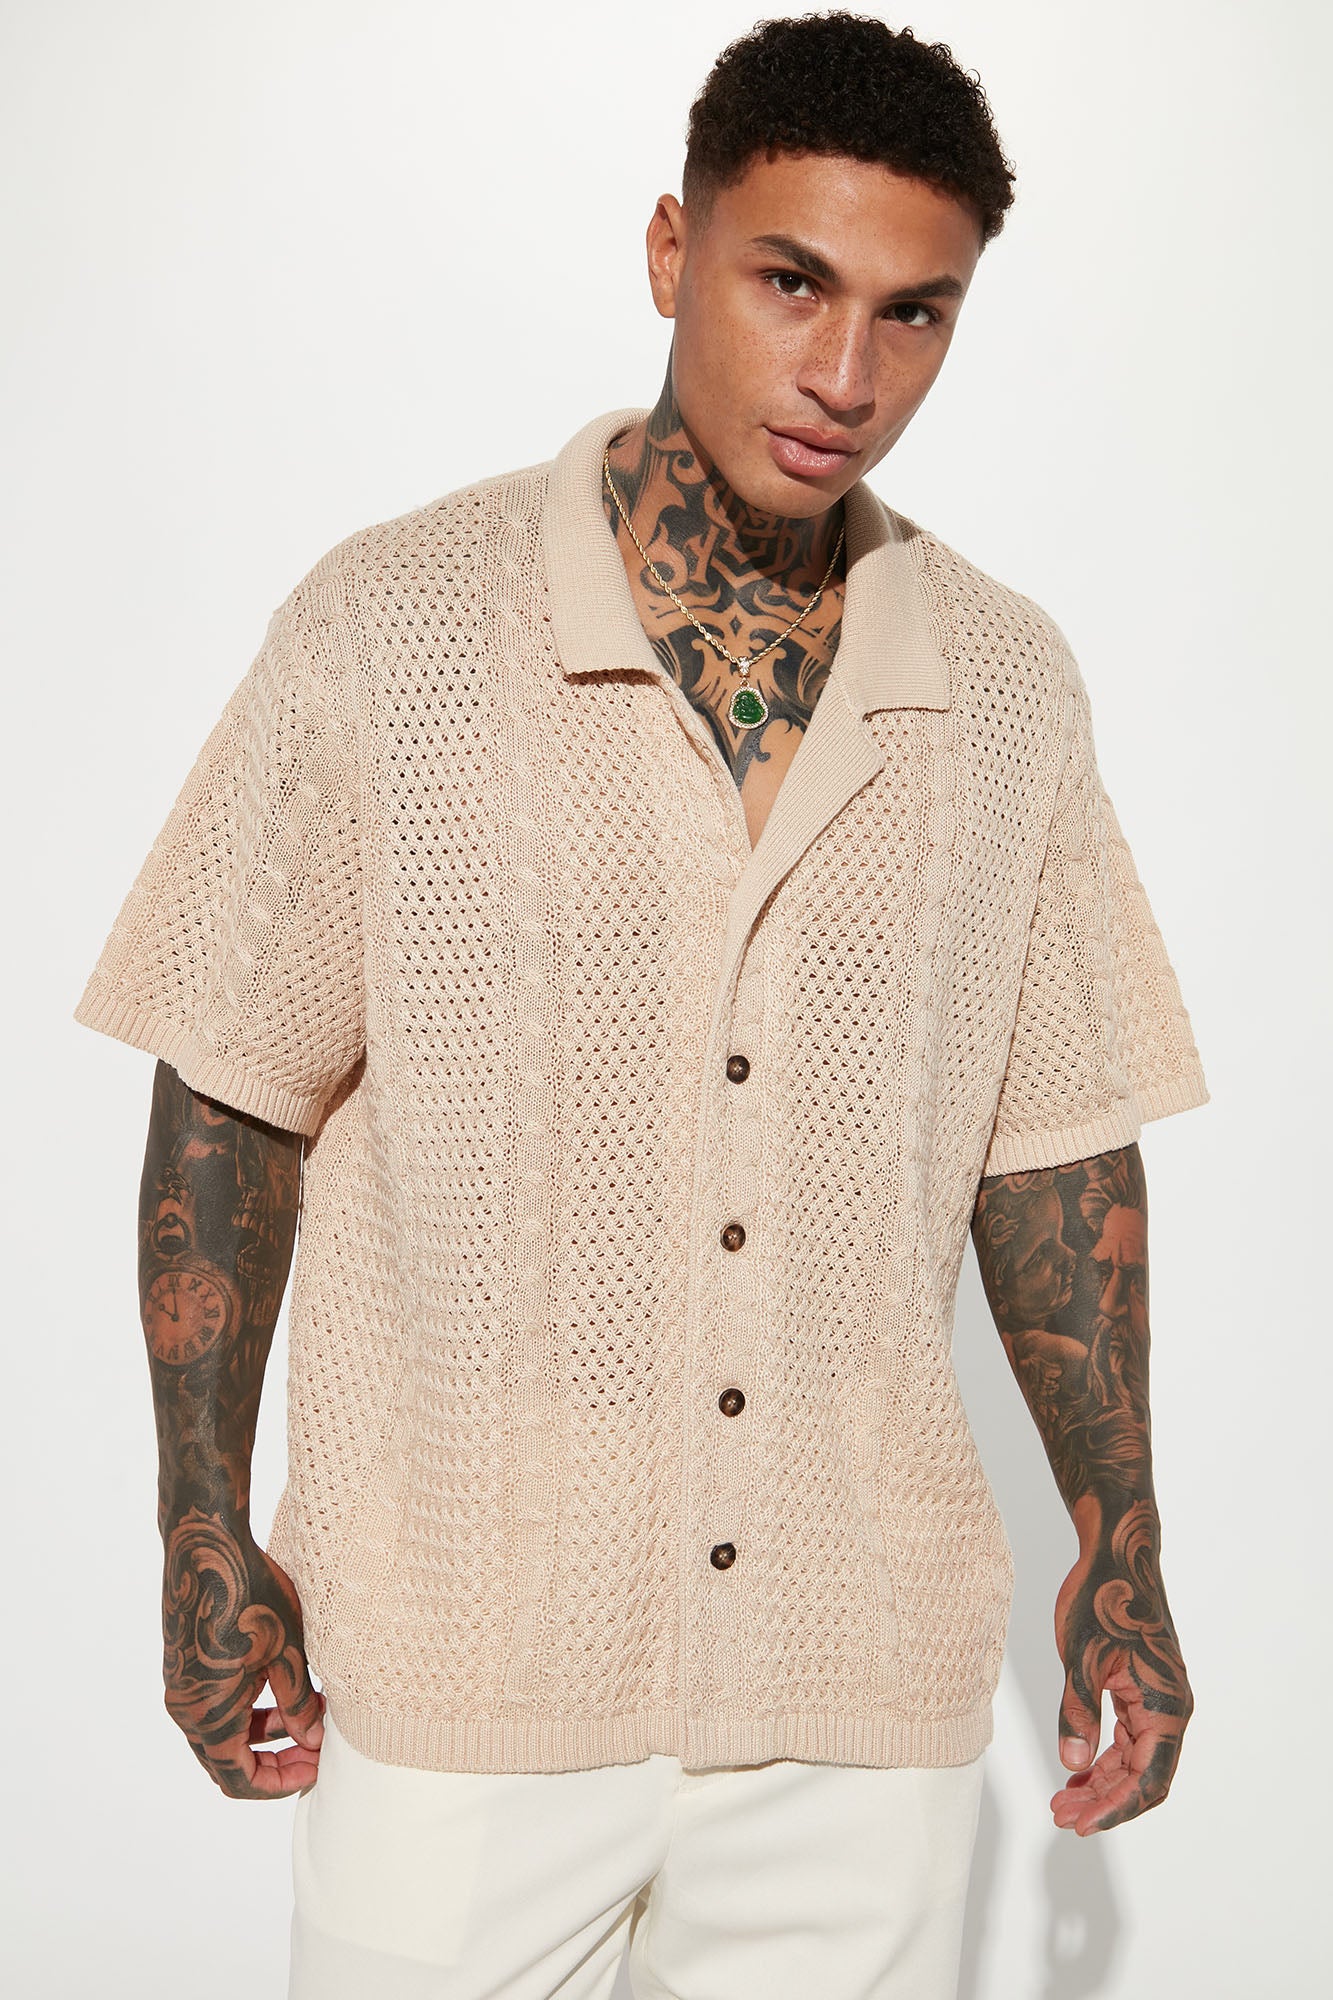 Men's Unwind Cable Knit Short Sleeve Button Up in Oatmeal Size Small by Fashion Nova